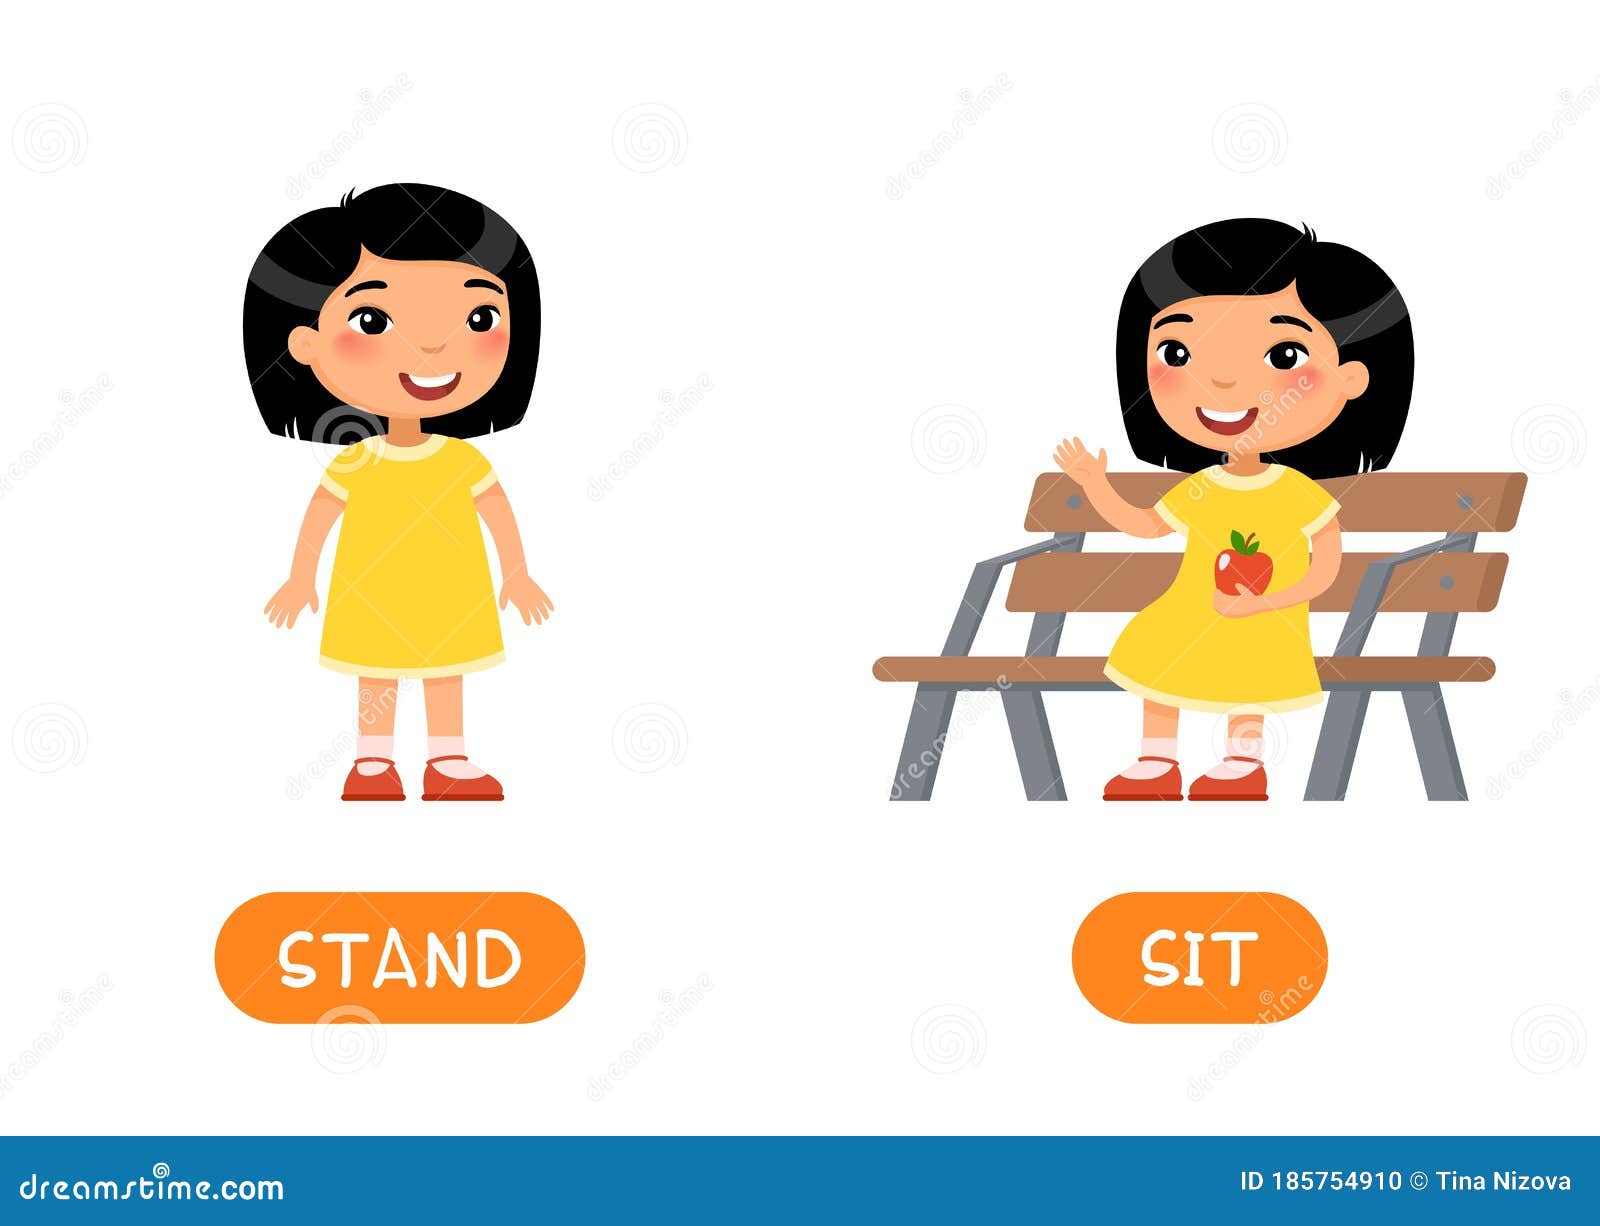 Antonyms Concept Stand And Sit Educational Flash Card With Little